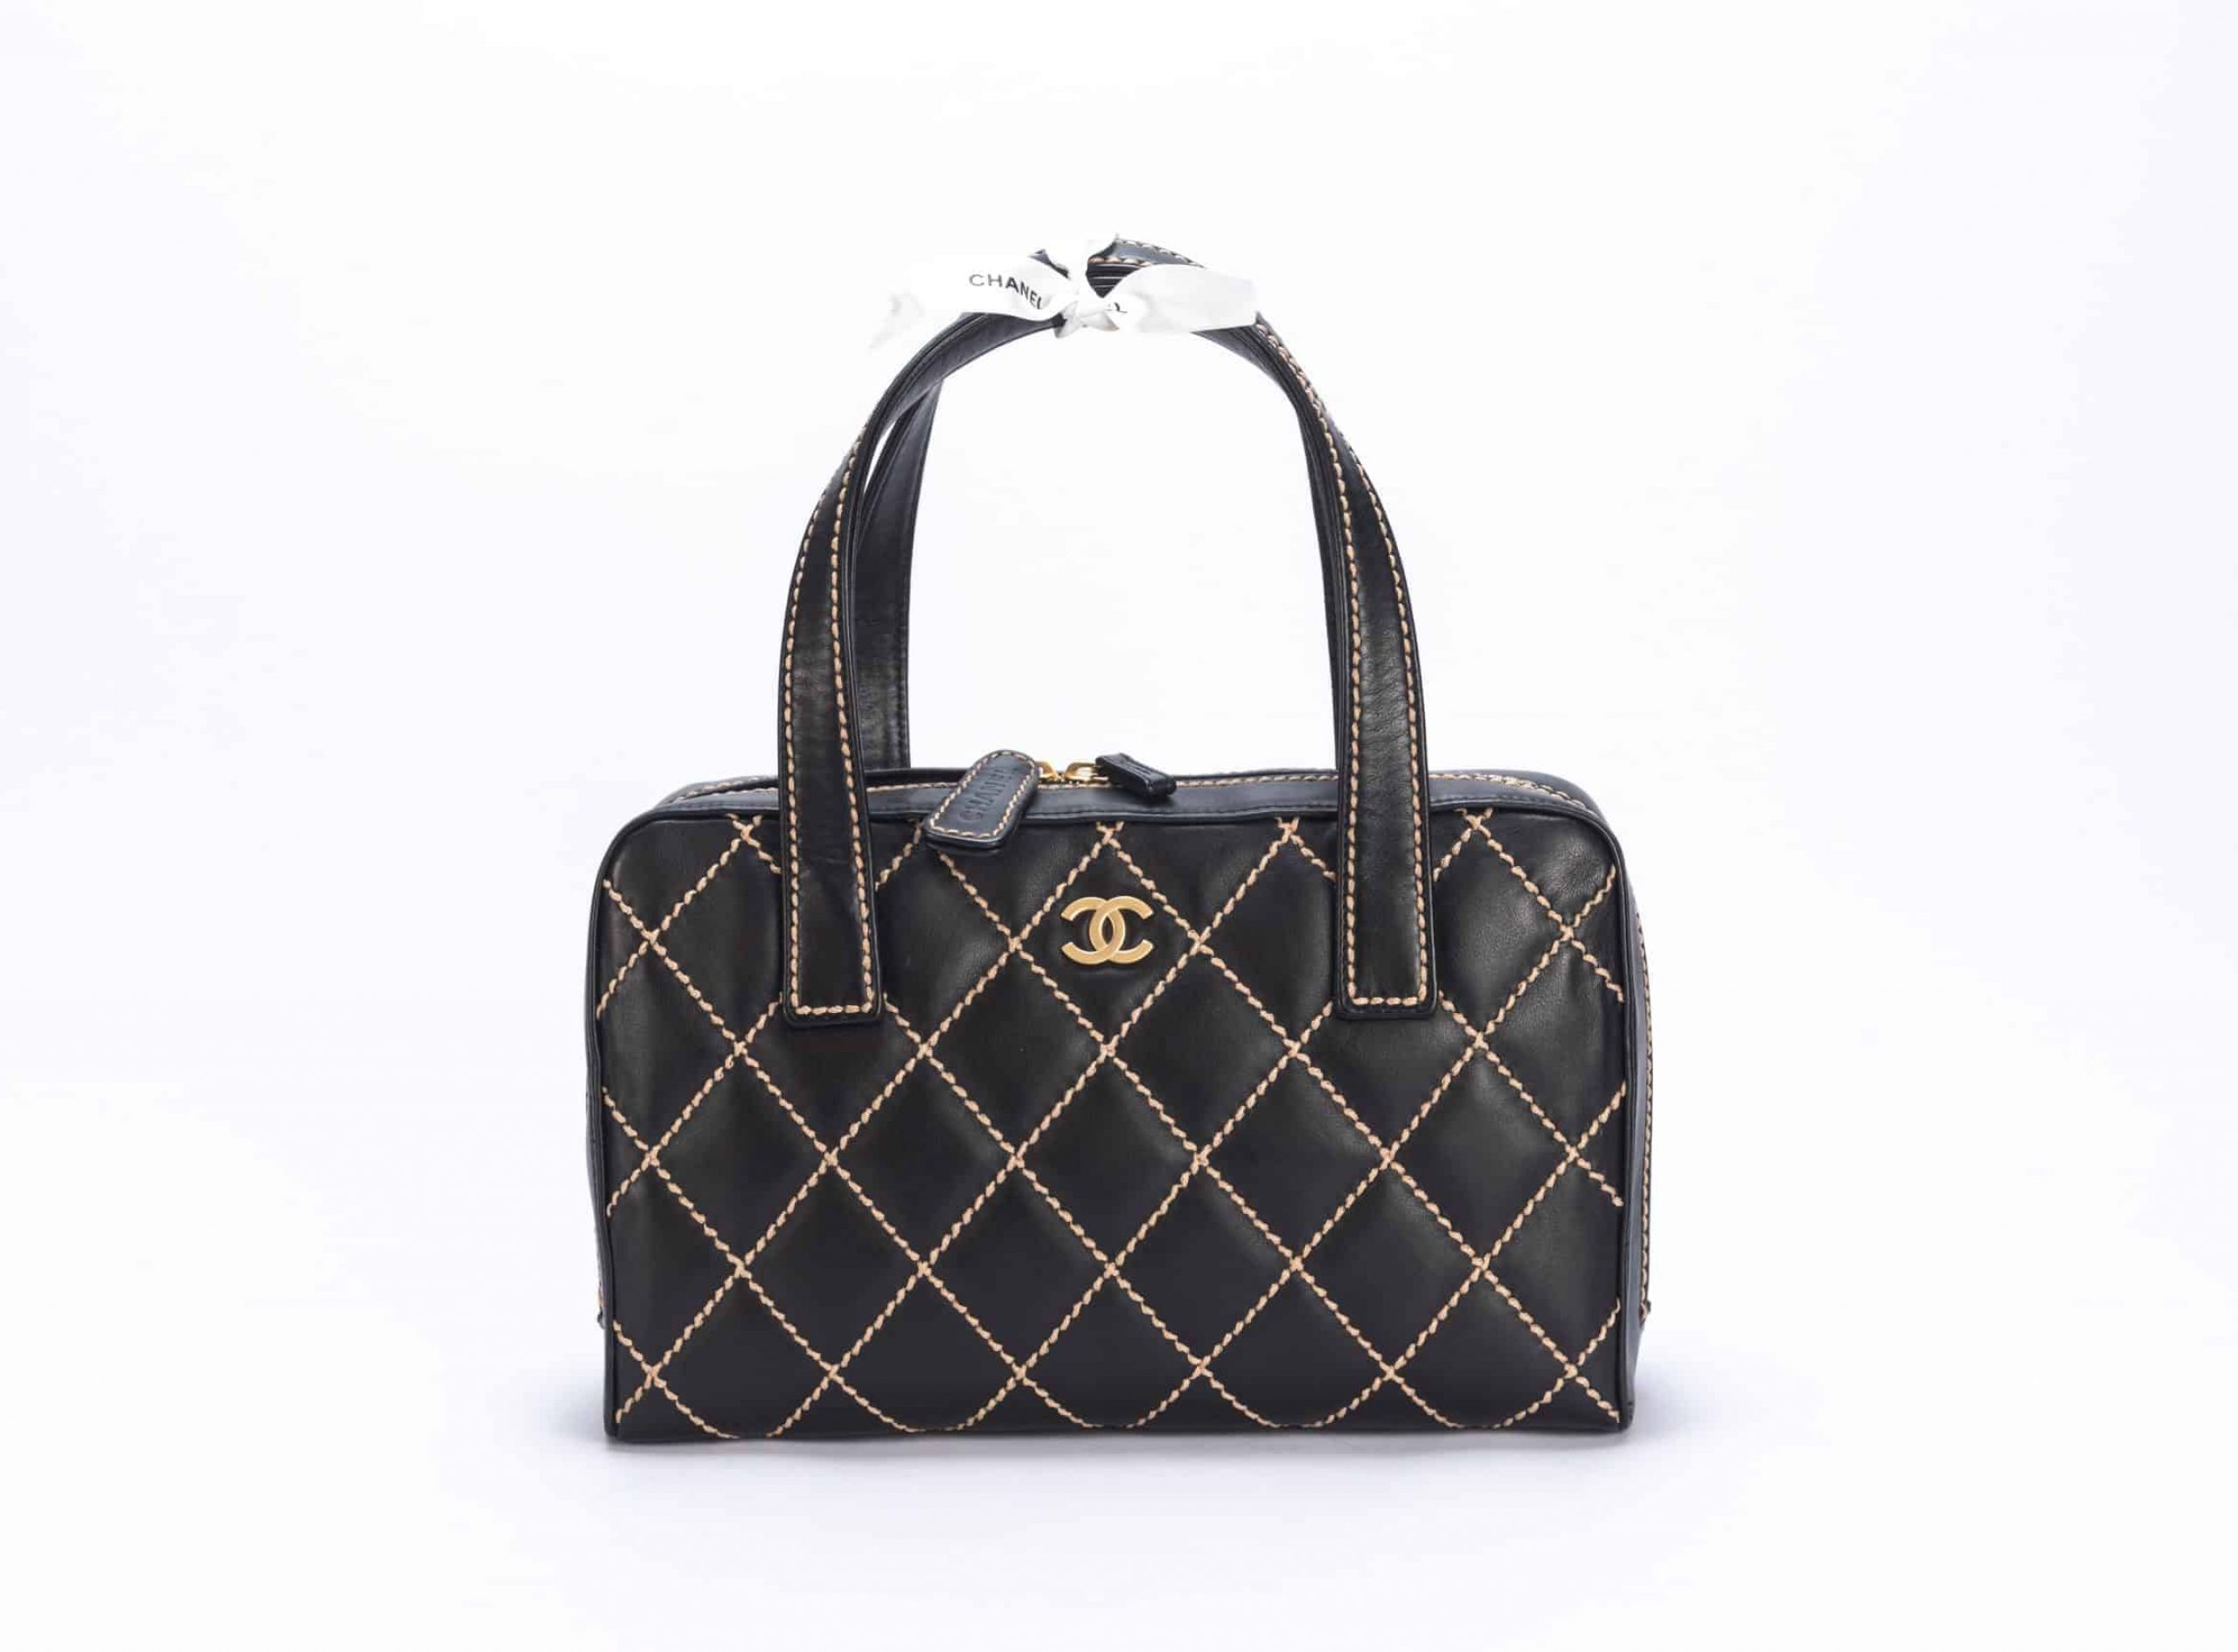 Chanel Surpique Quilted Leather in Black - 1